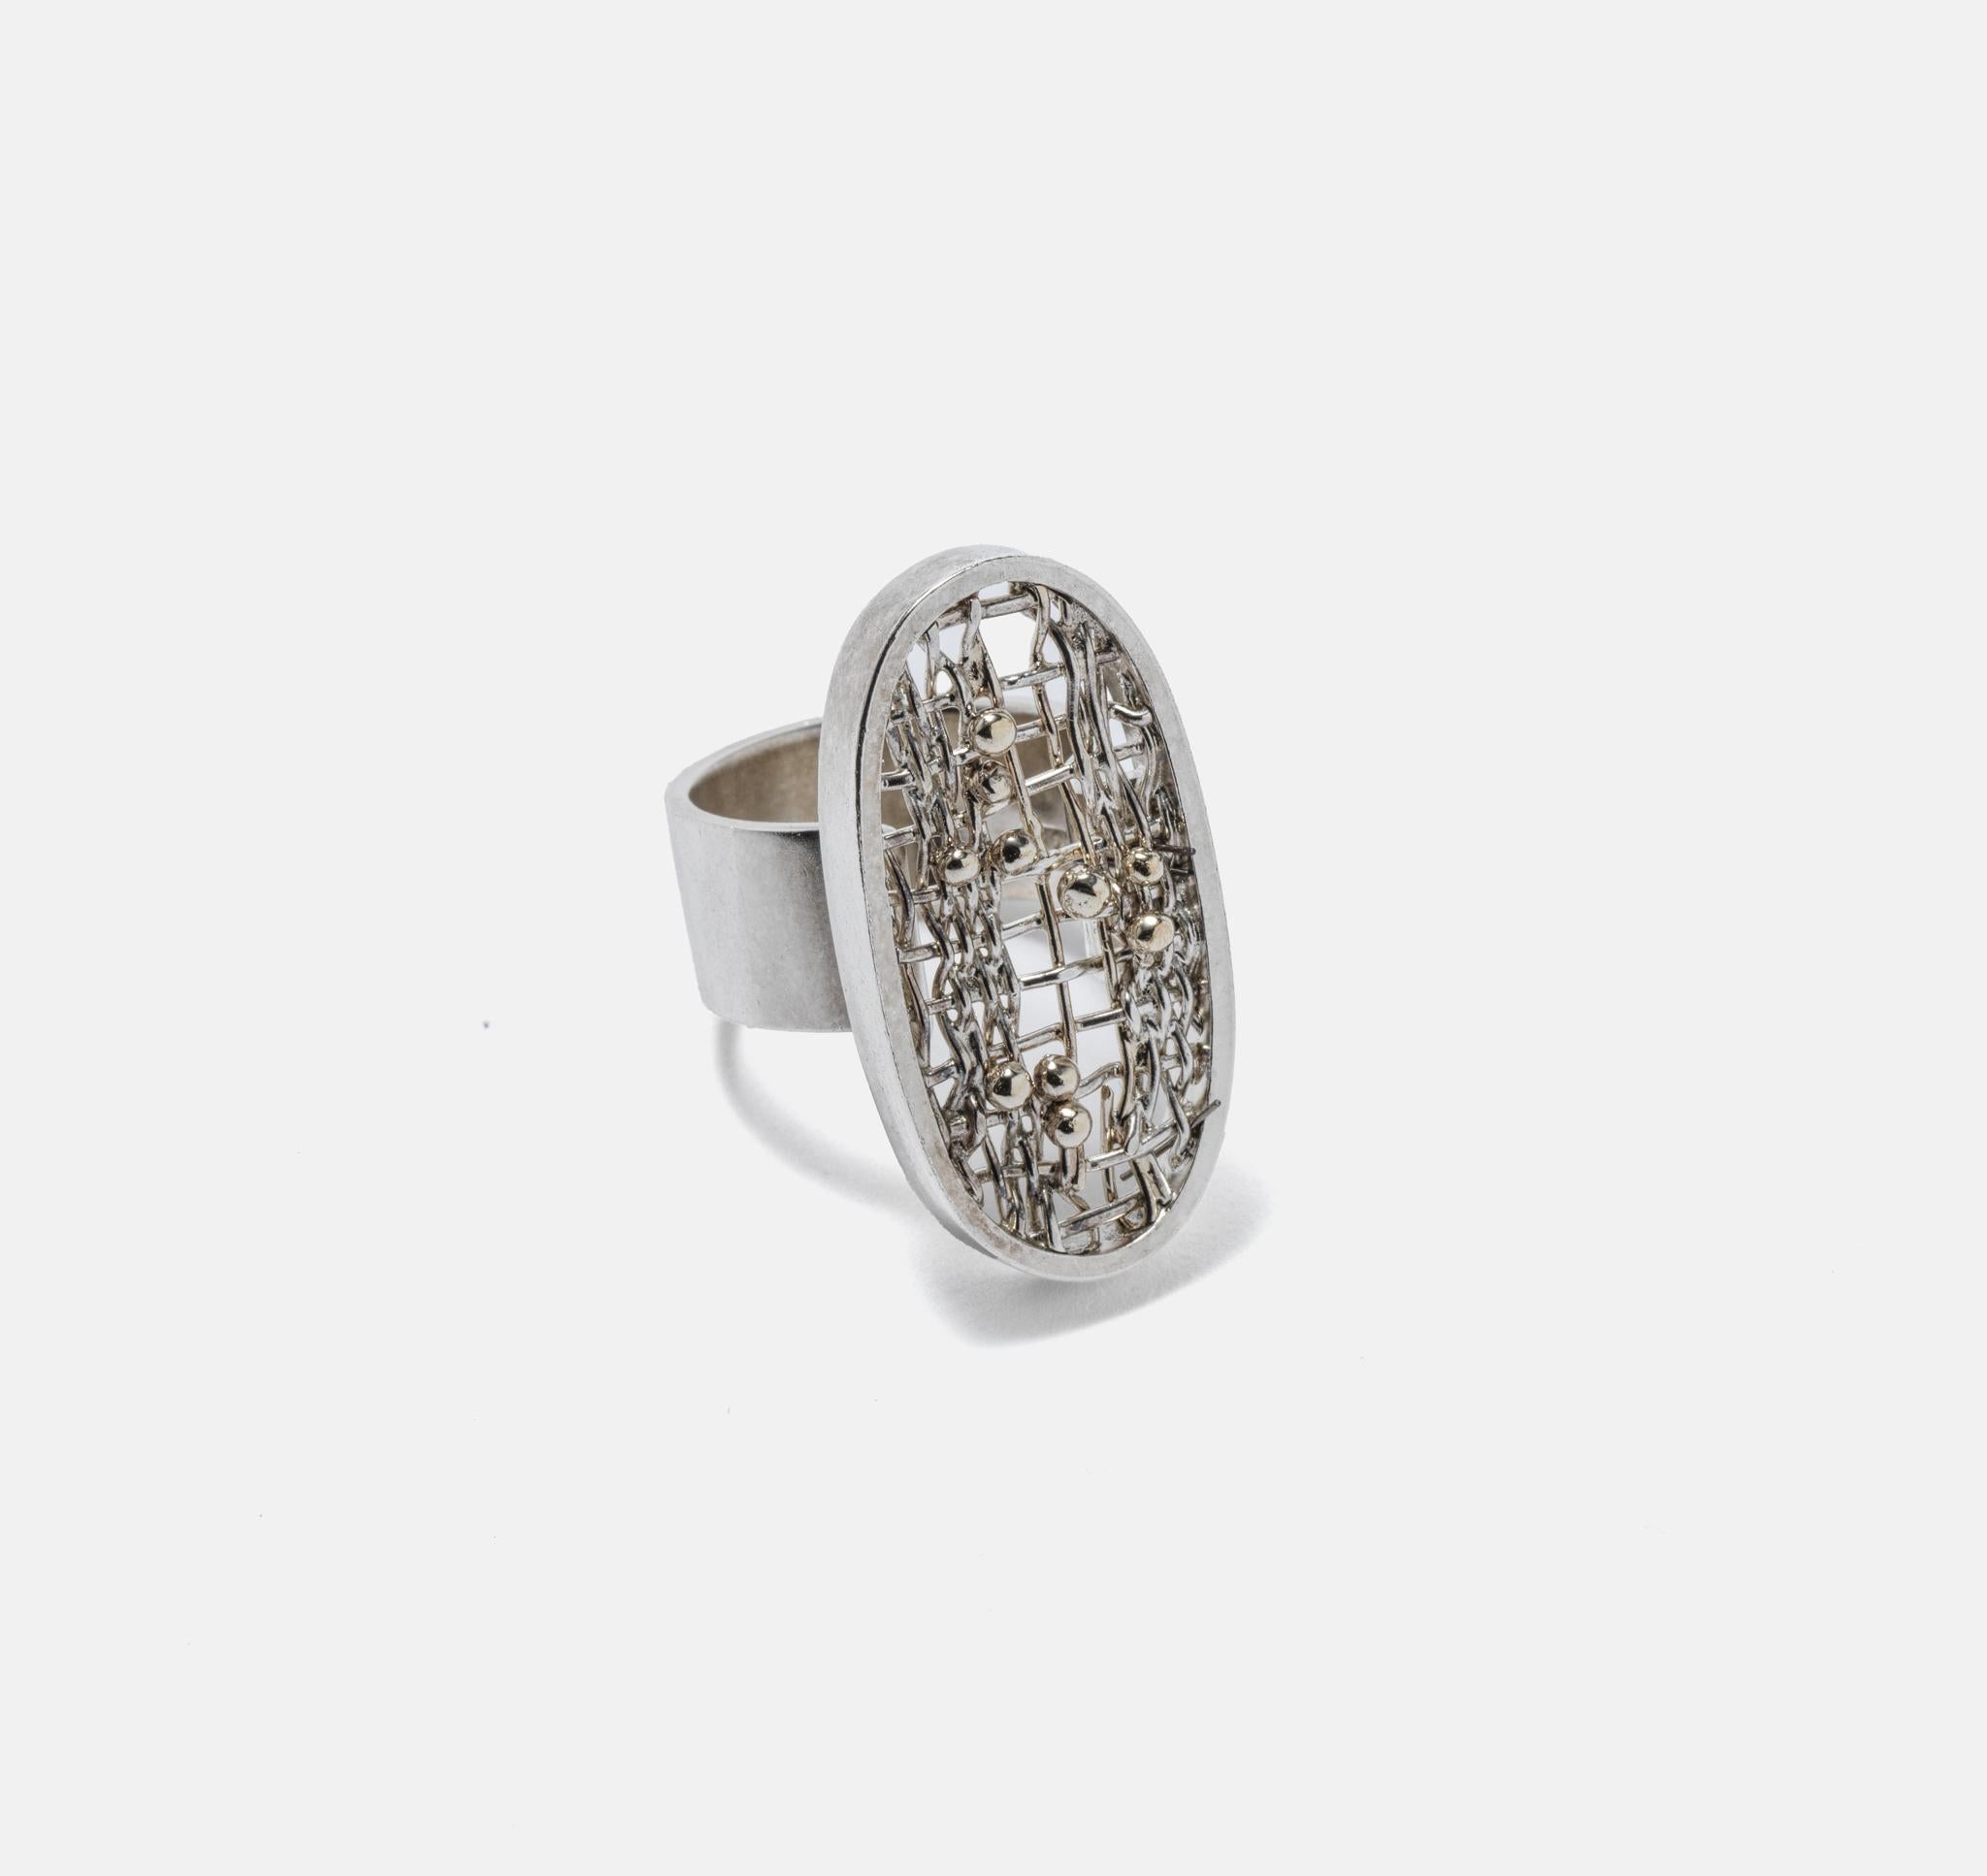 Nicely designed silver ring where silver threads bears small balls of gold on it. This type of design is typical for Anders Högberg. He was one of swedens most prominent silver and goldsmiths in the 1970 and 80s. In our store you will see a pair of